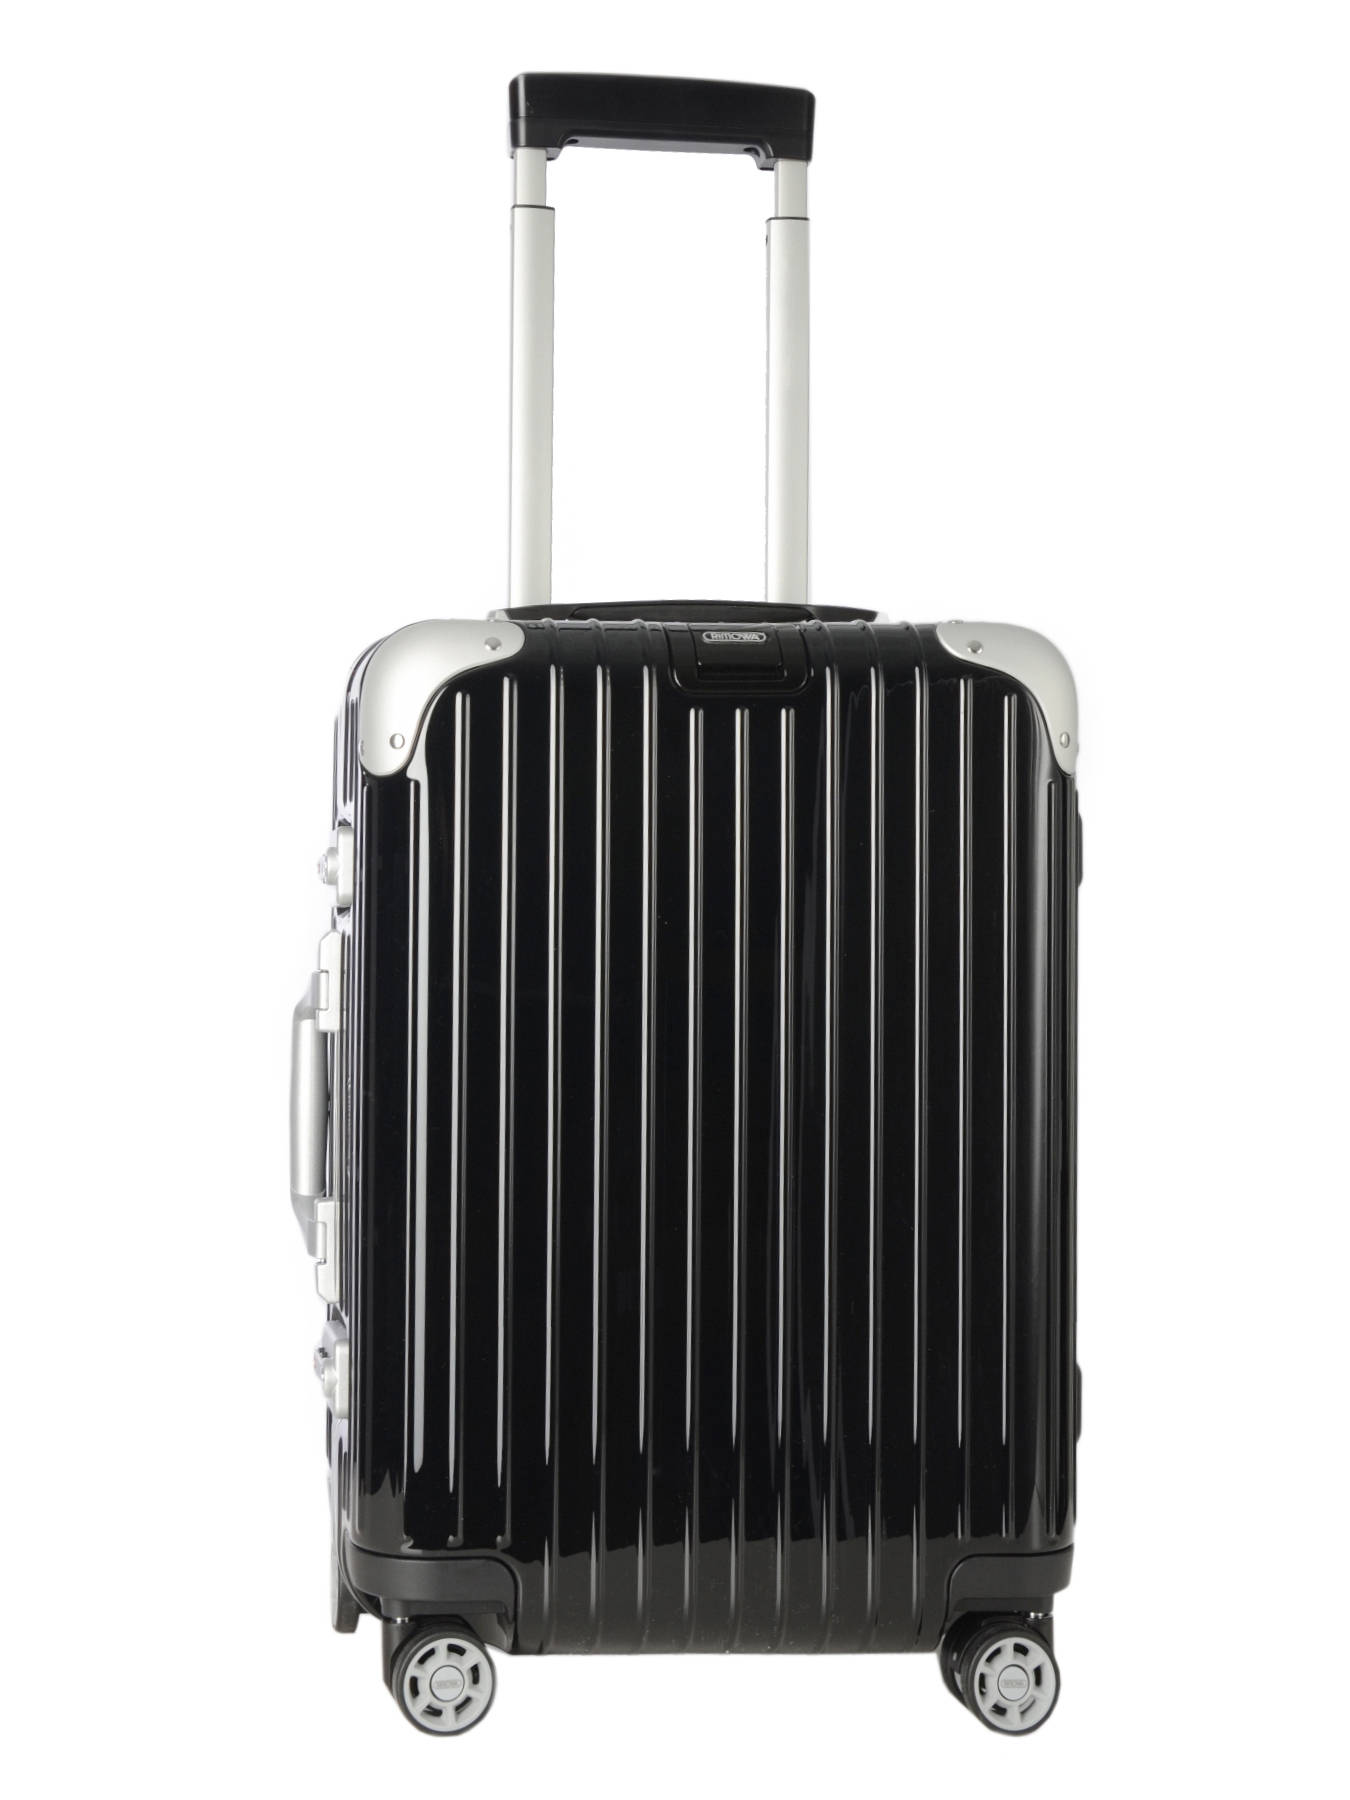 Rimowa Carry-on-suitcase Limbo - Best prices